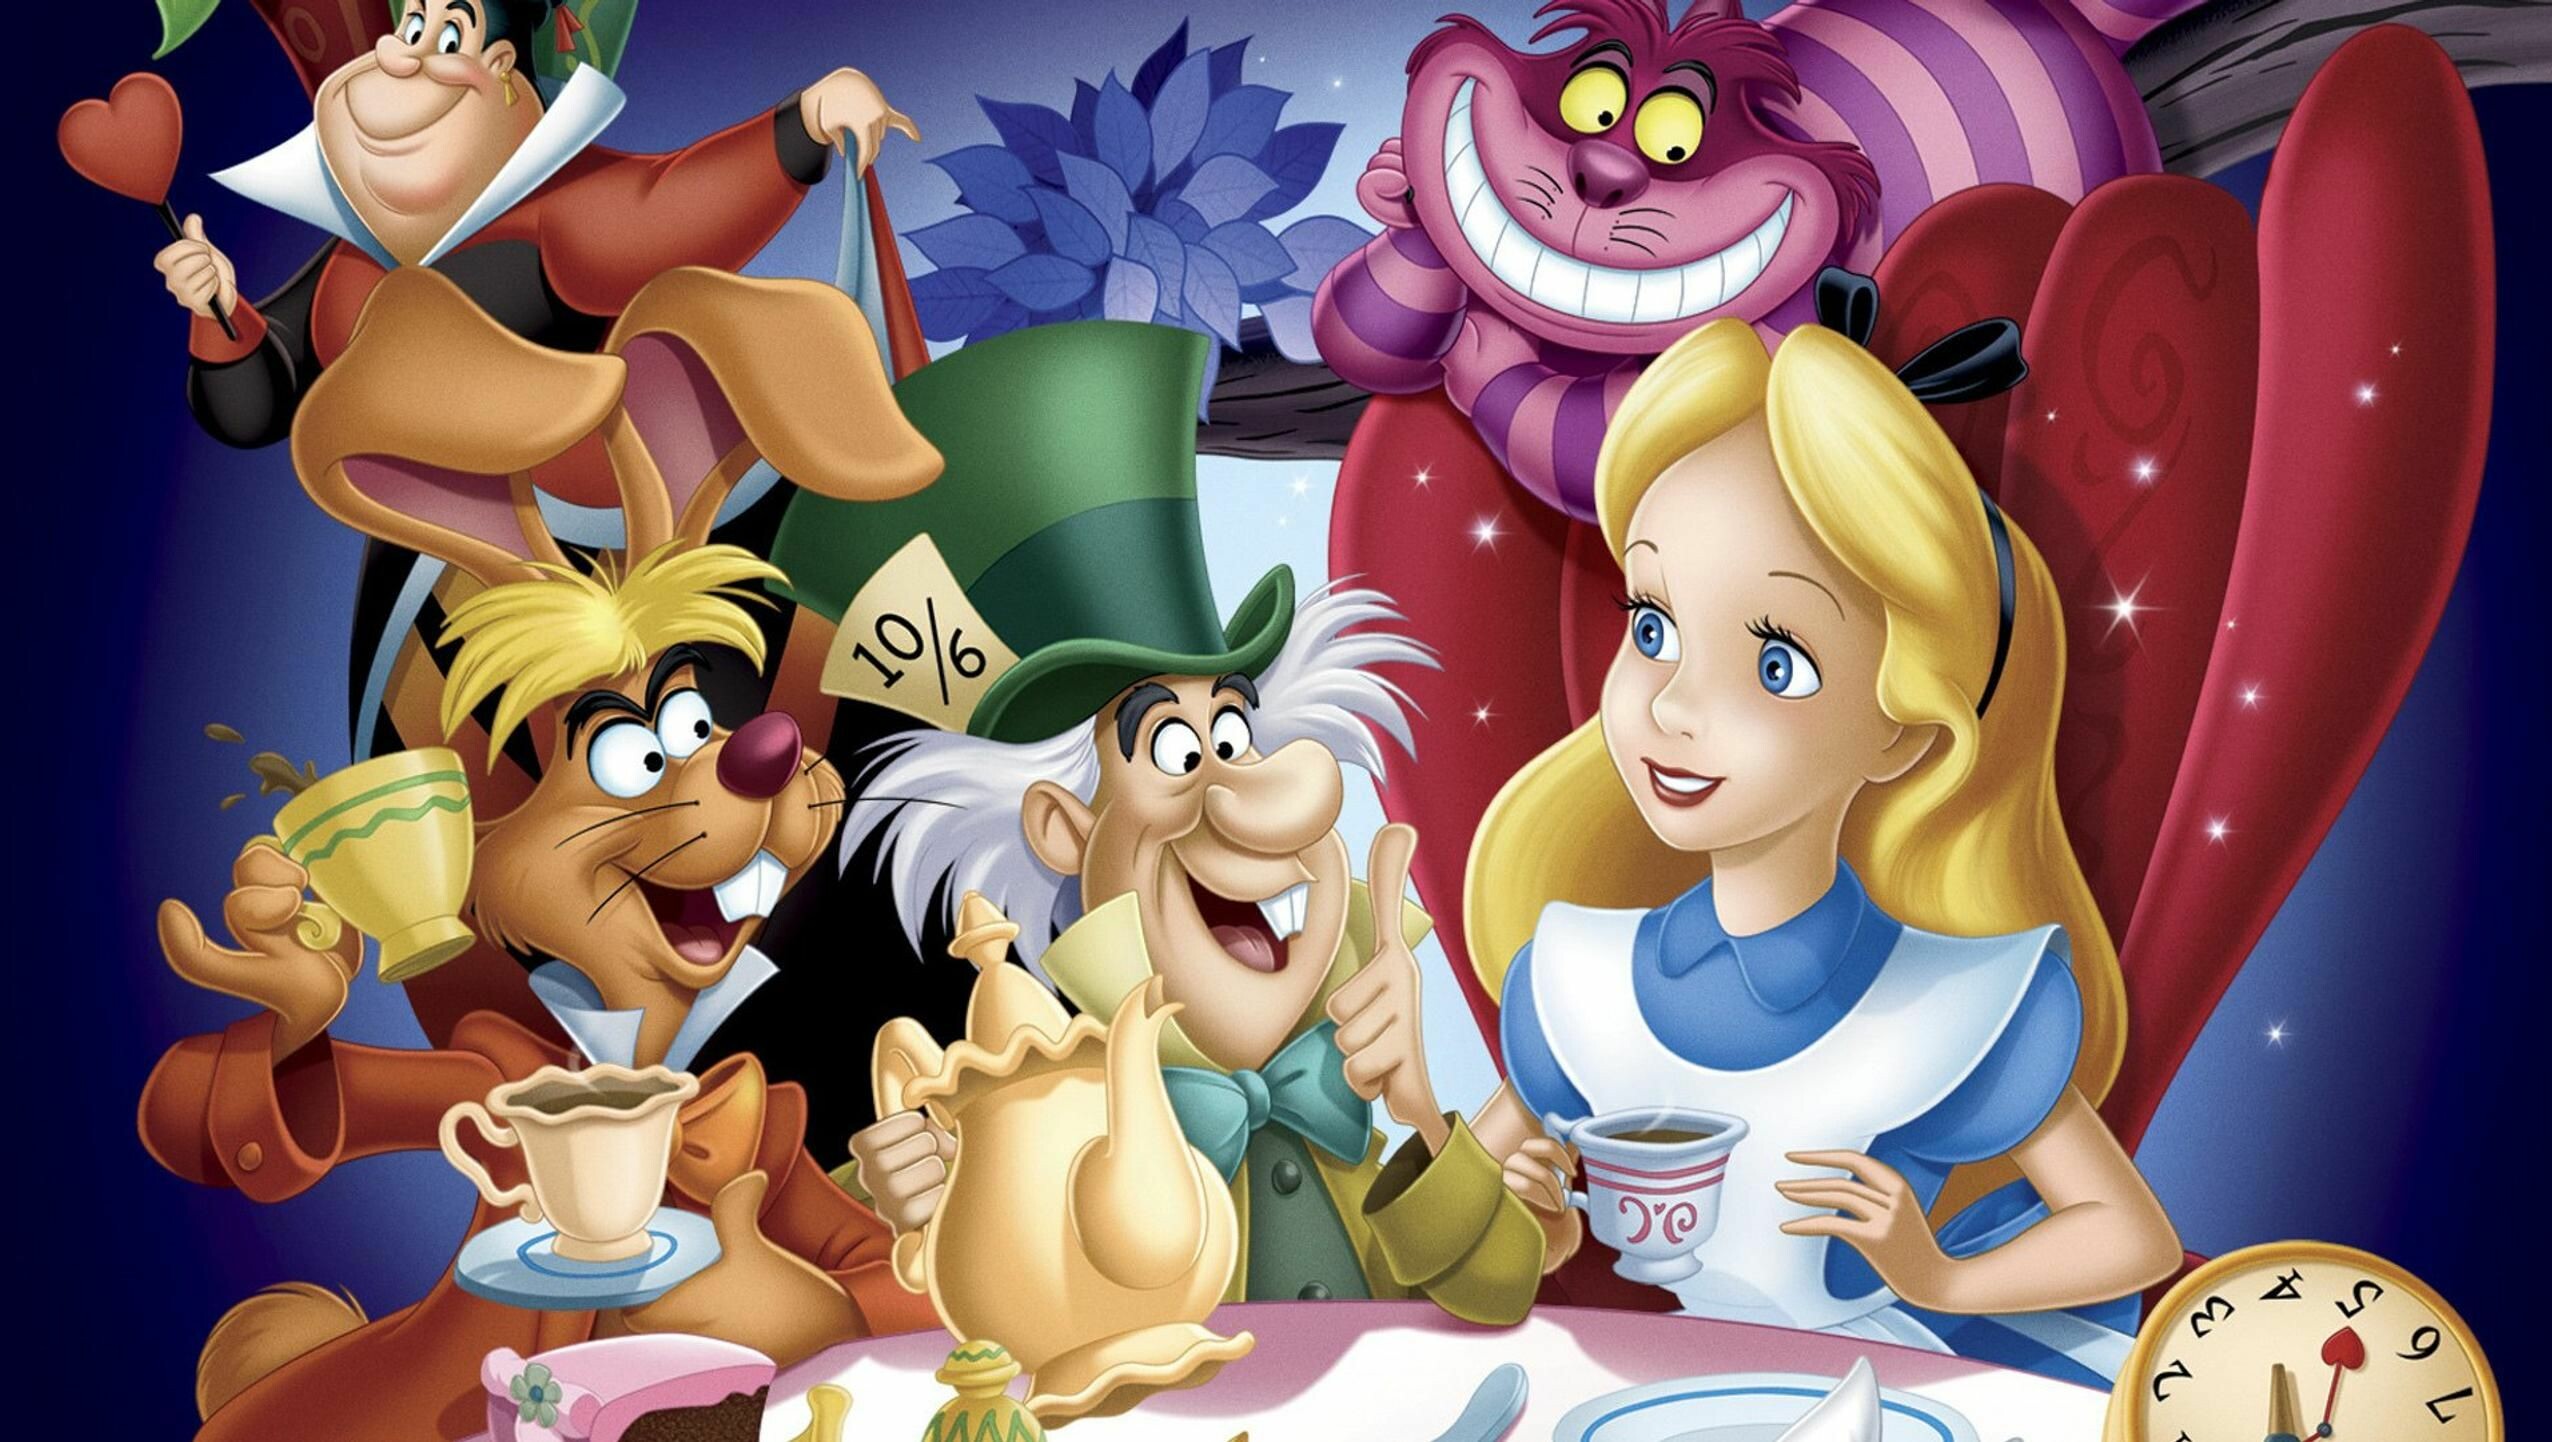 Alice In Wonderland (Cartoon): The 13th animated feature film produced by Walt Disney Productions. 2560x1450 HD Wallpaper.